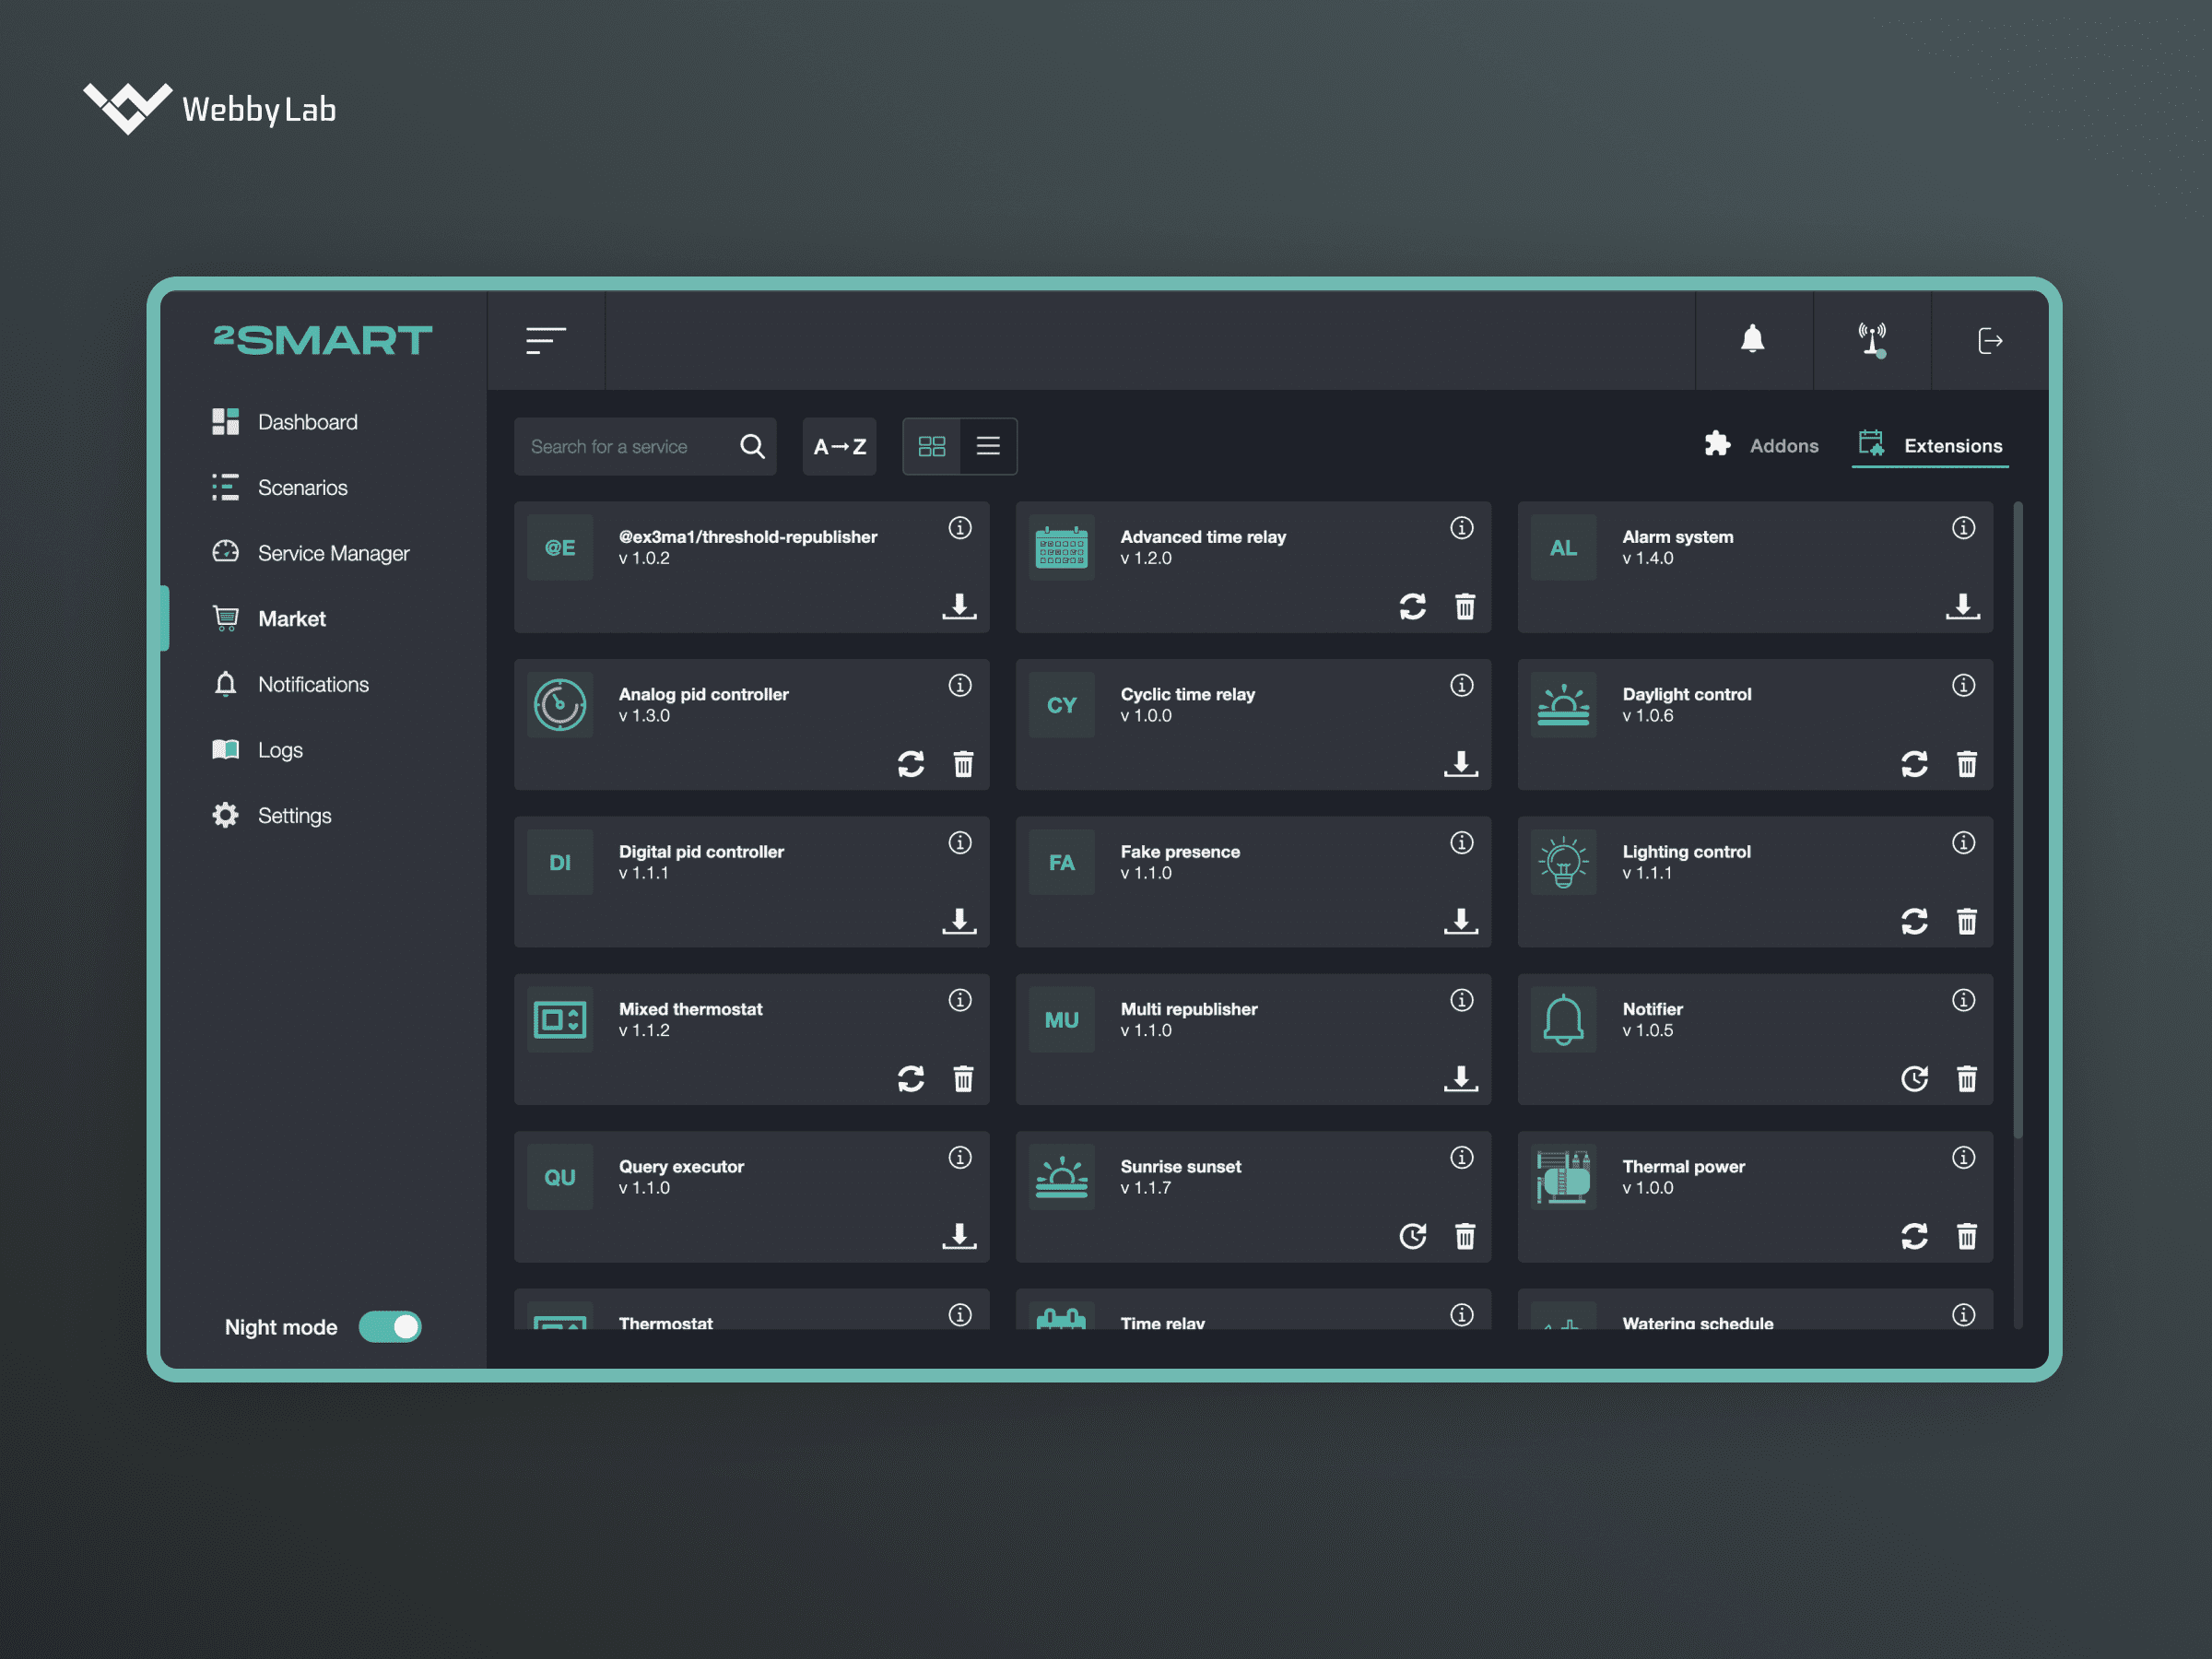 The dashboard of a 2Smart Standalone automation platform listing all home automation scenarios.